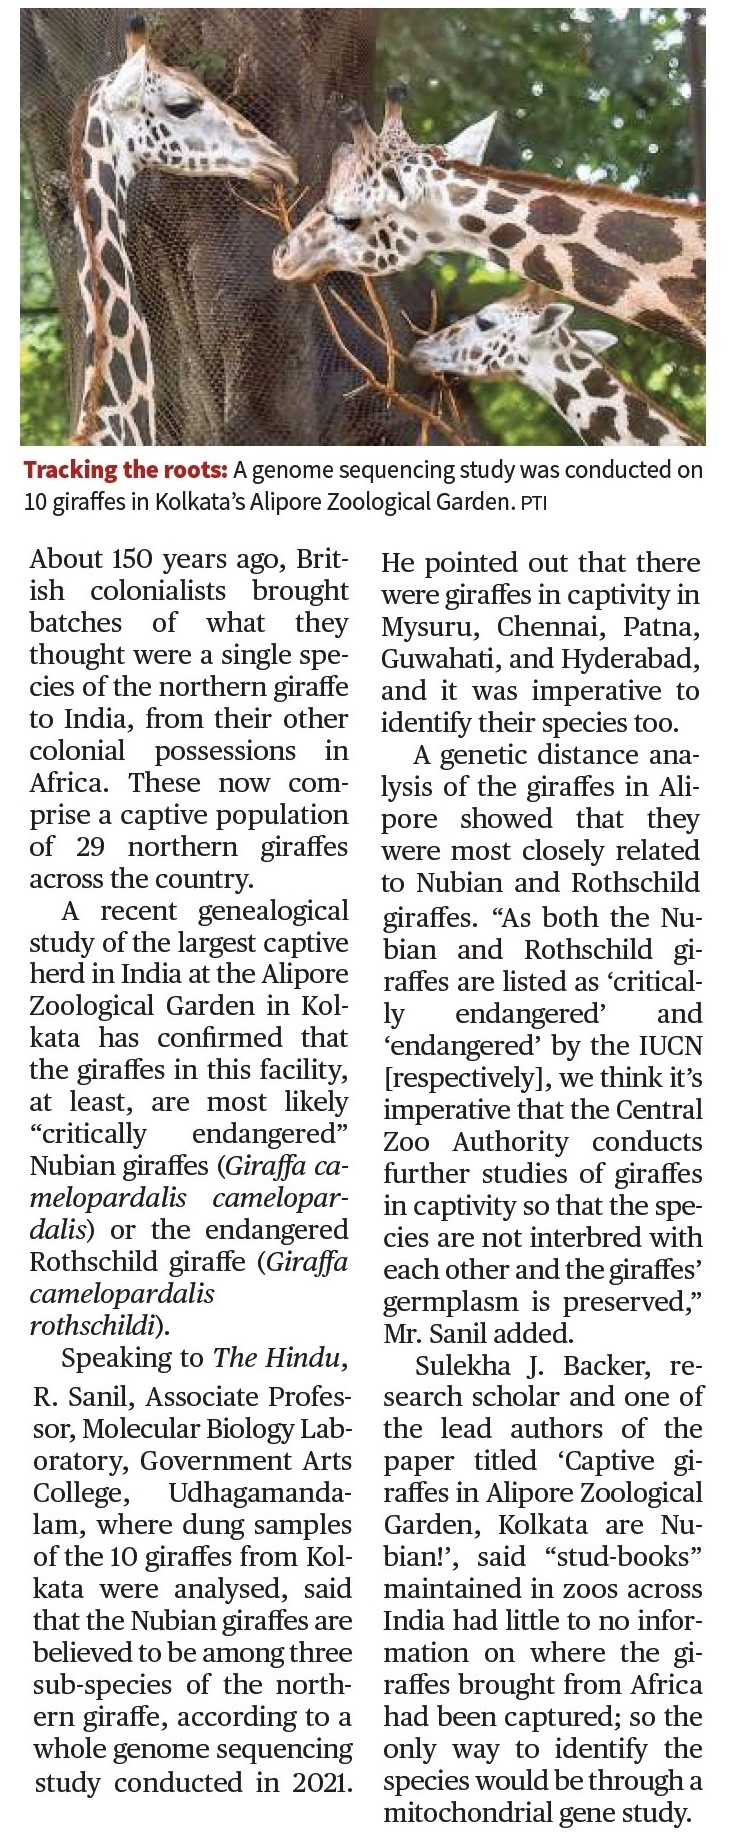 Giraffes brought to India by British may belong to endangered species